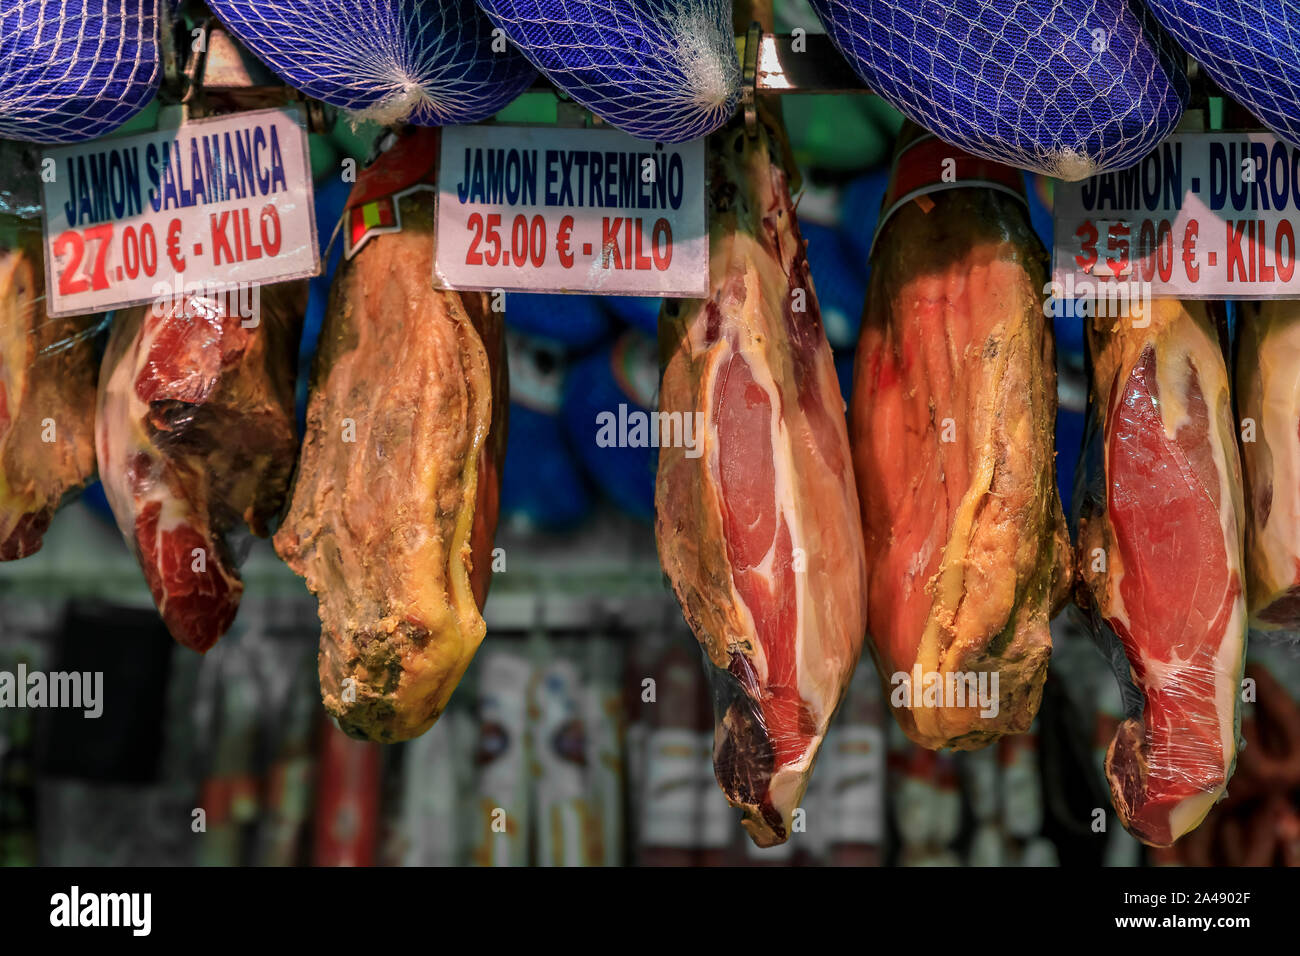 Whole bone-in legs of Spanish serrano iberico ham on display with price tags with the ham names at a butcher shop in a local market Madrid, Spain Stock Photo